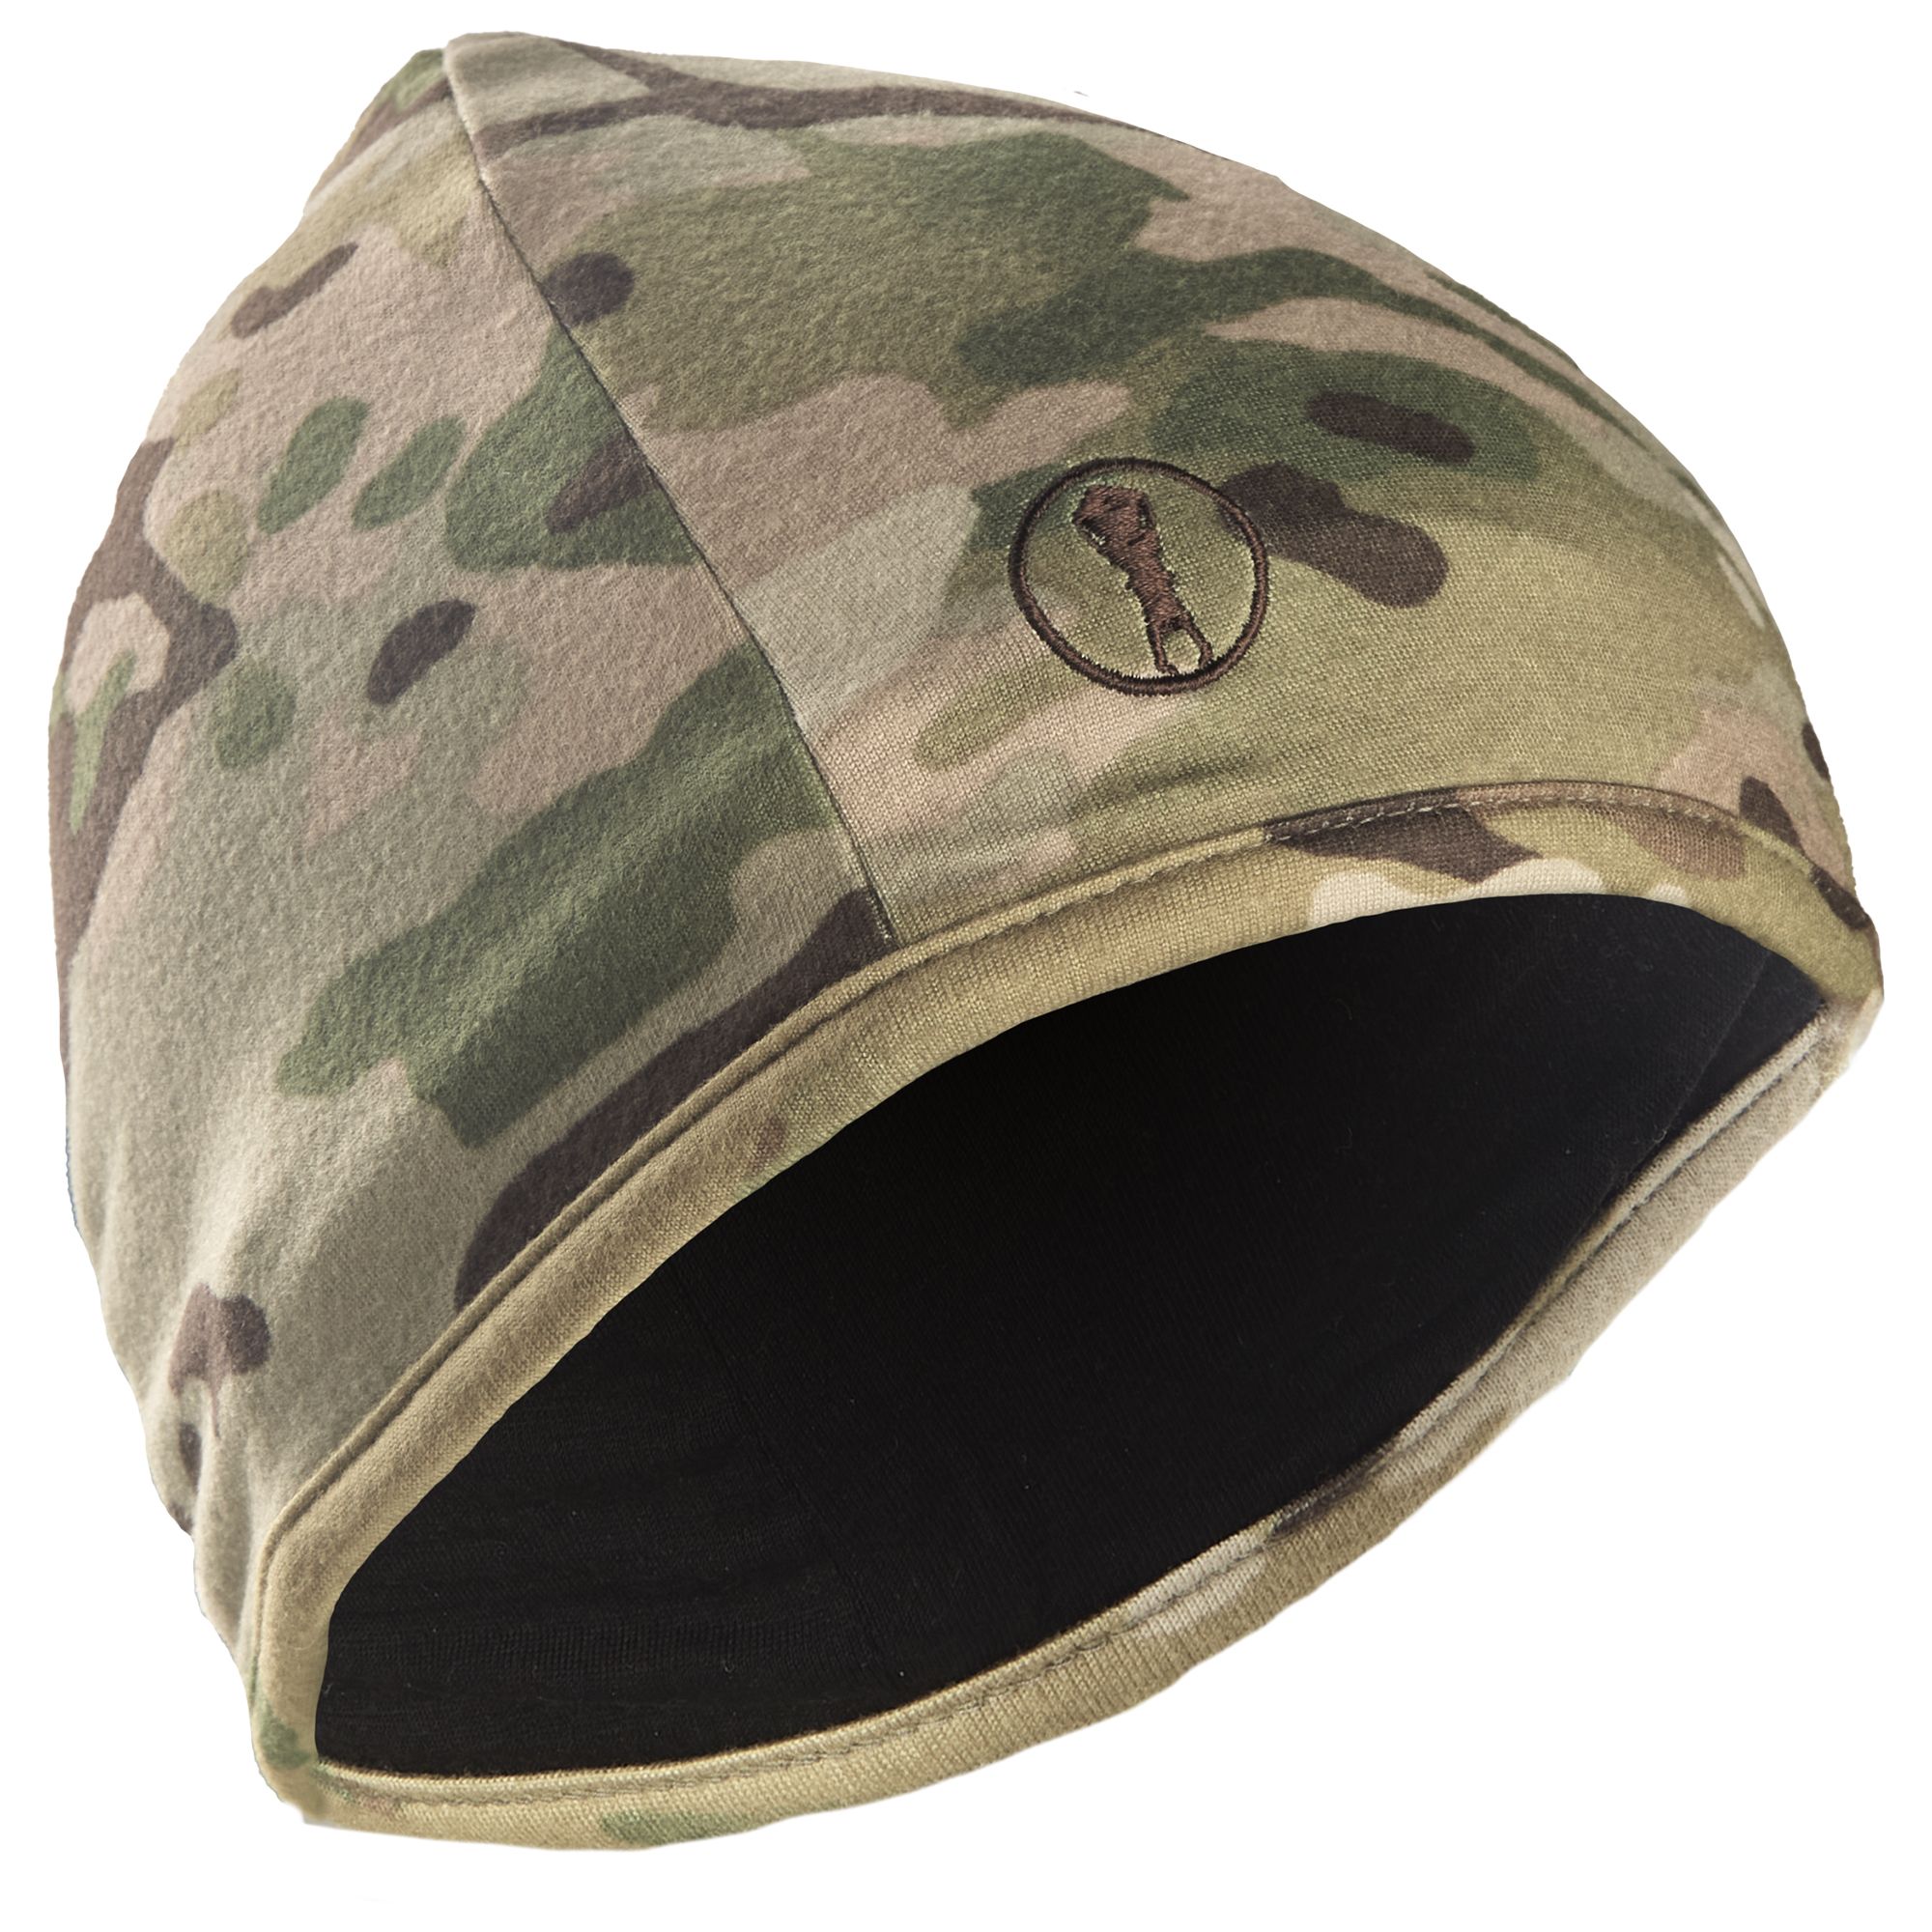 Platatac Special Projects Multicam Beanie - Ironside Military